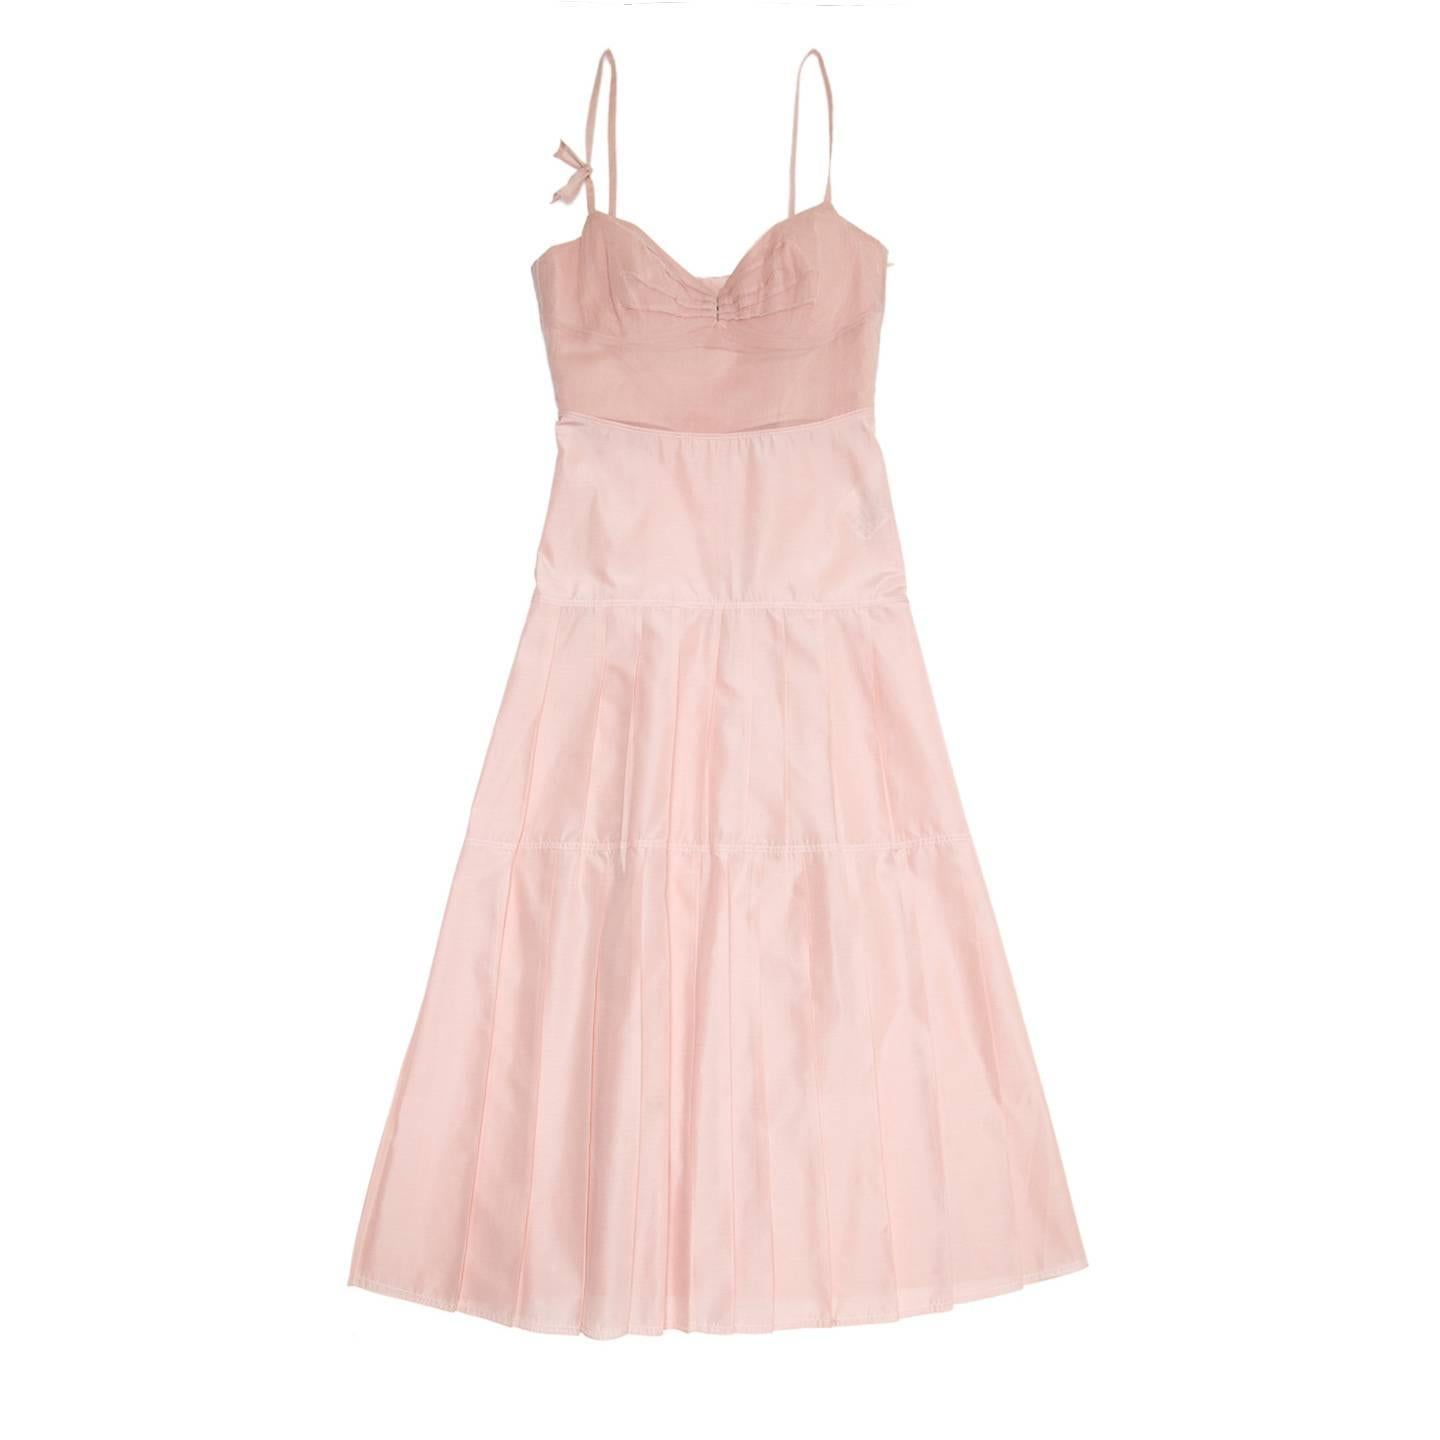 Beautiful and classic dusty pink silk & cotton blend long dress with A-shape skirt embellished by irregular pleats starting at hips. The top has spagetti straps, is fitted and shaped with an inner wired bra.

Size  40 French sizing

Condition 